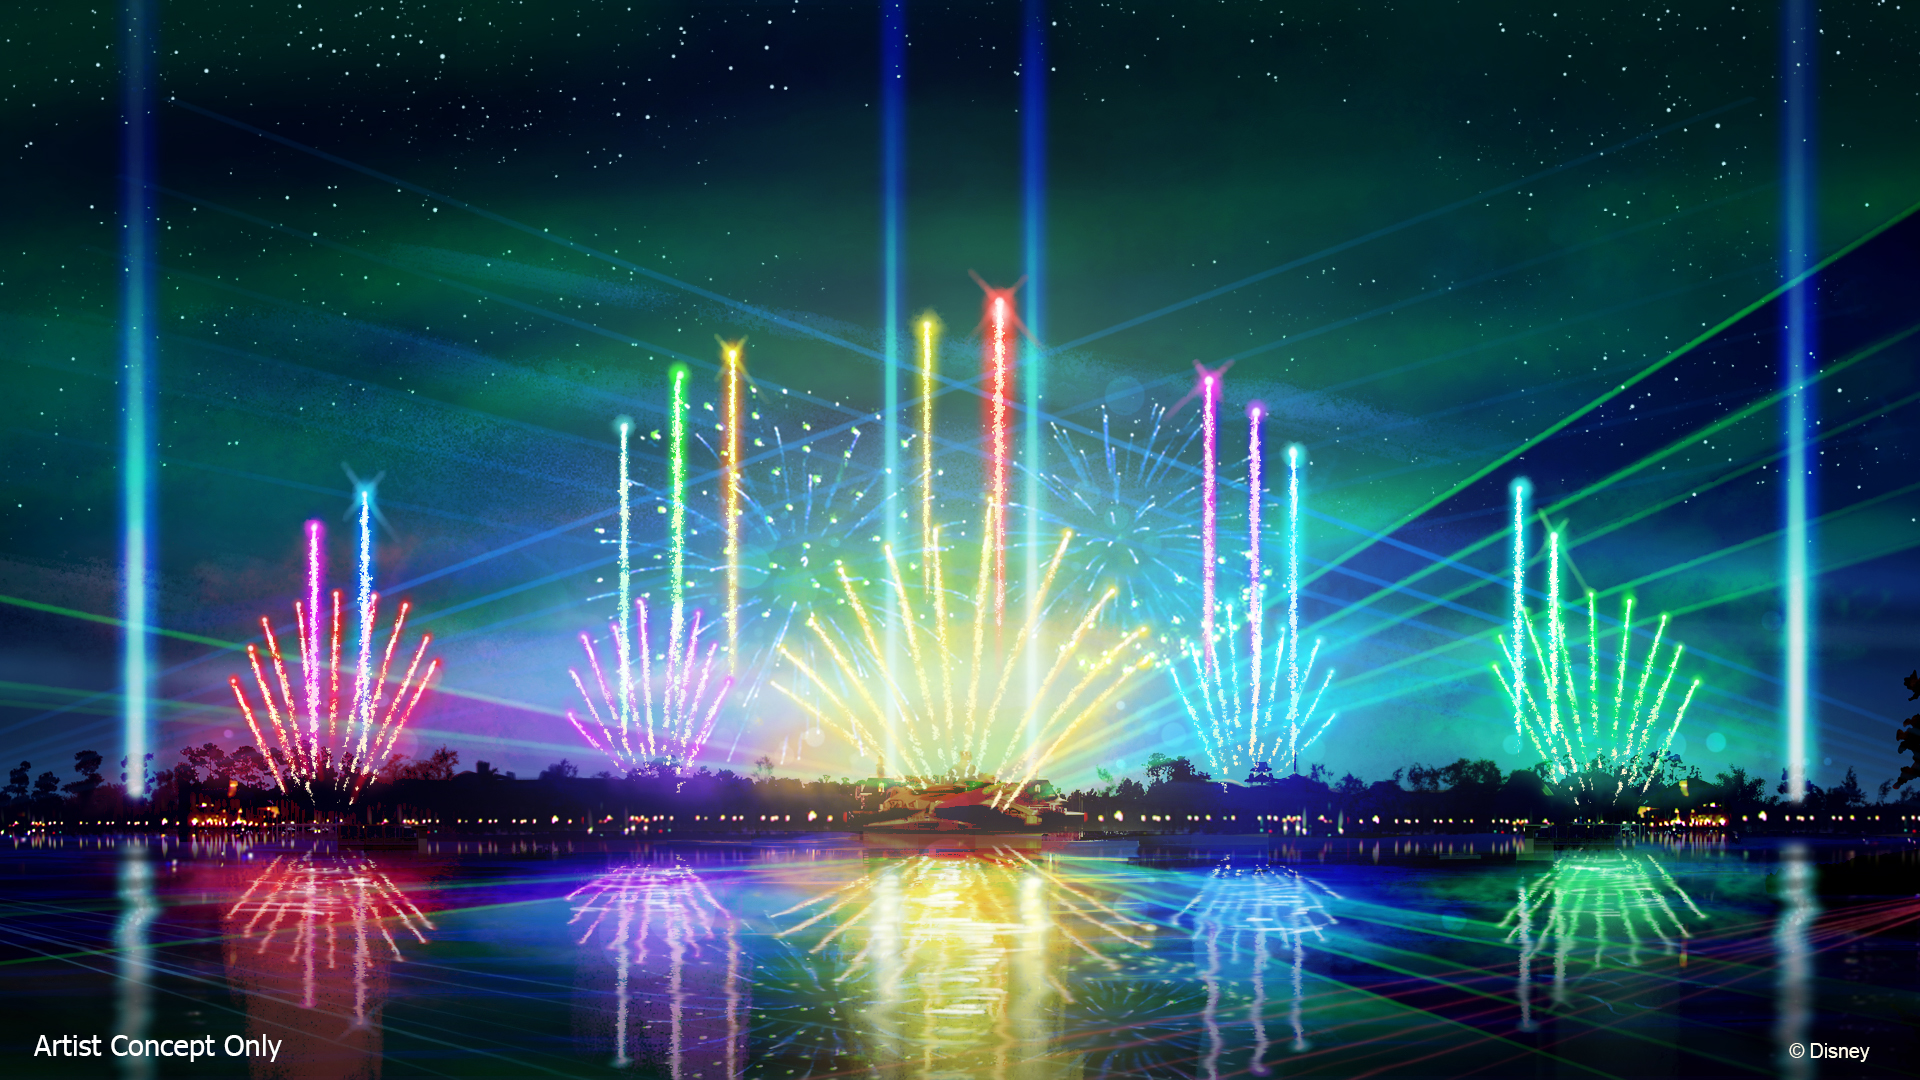 Epcot Forever Debuts October 1, 2019